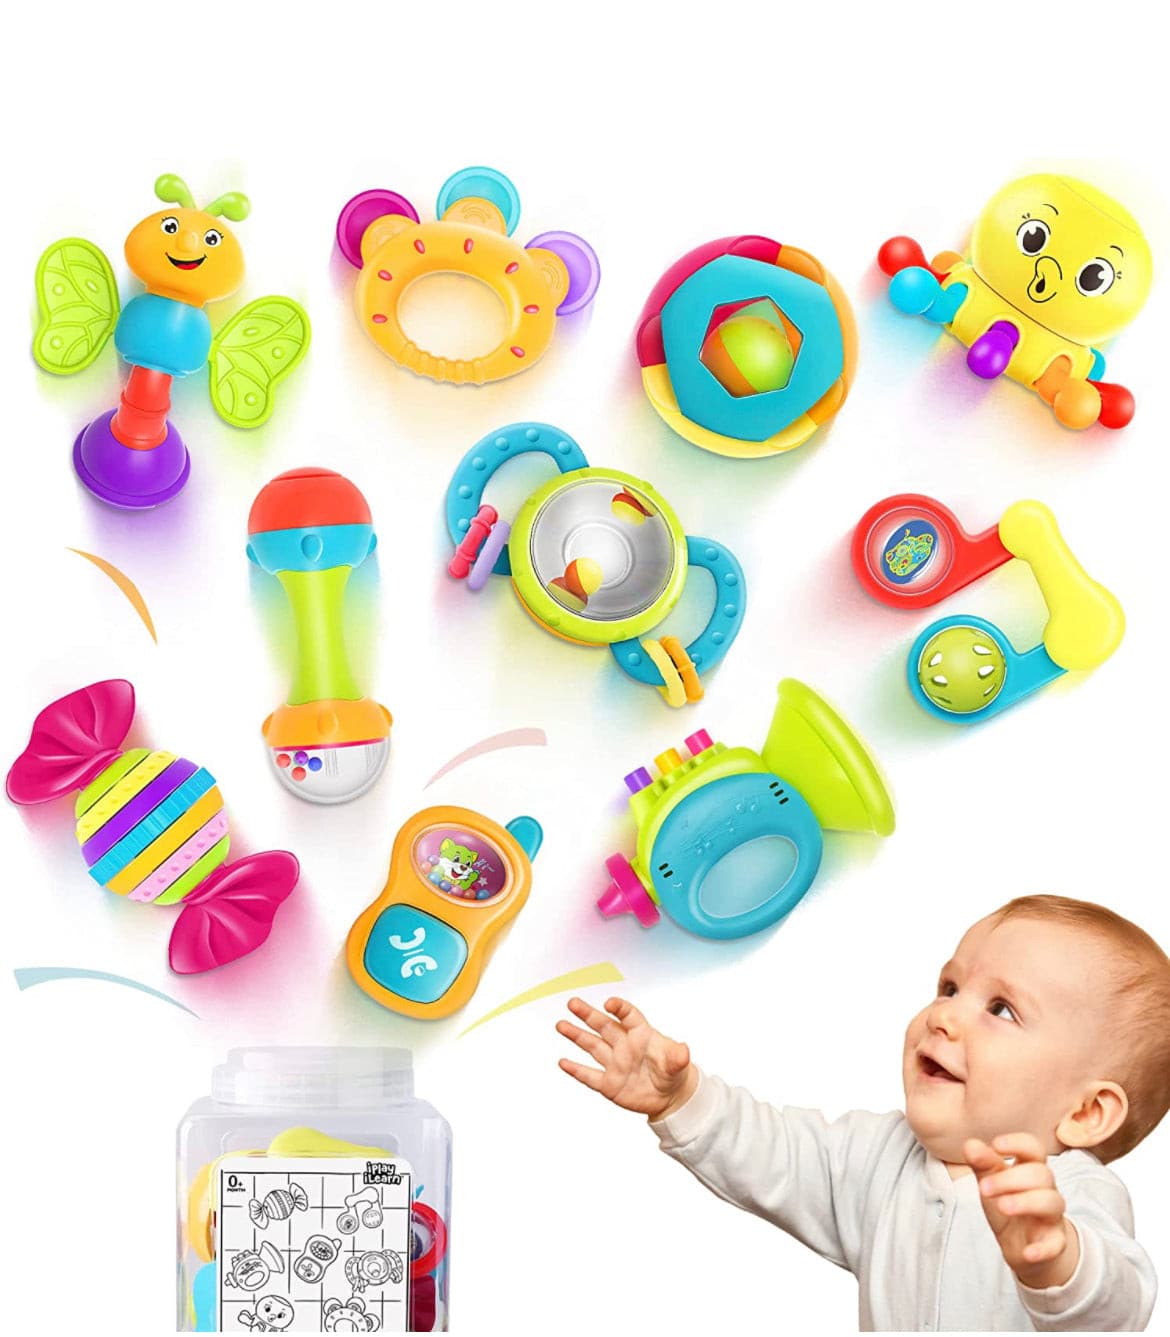 10pcs Baby Rattles Toys Set by iPlay, for 0-12 Month.